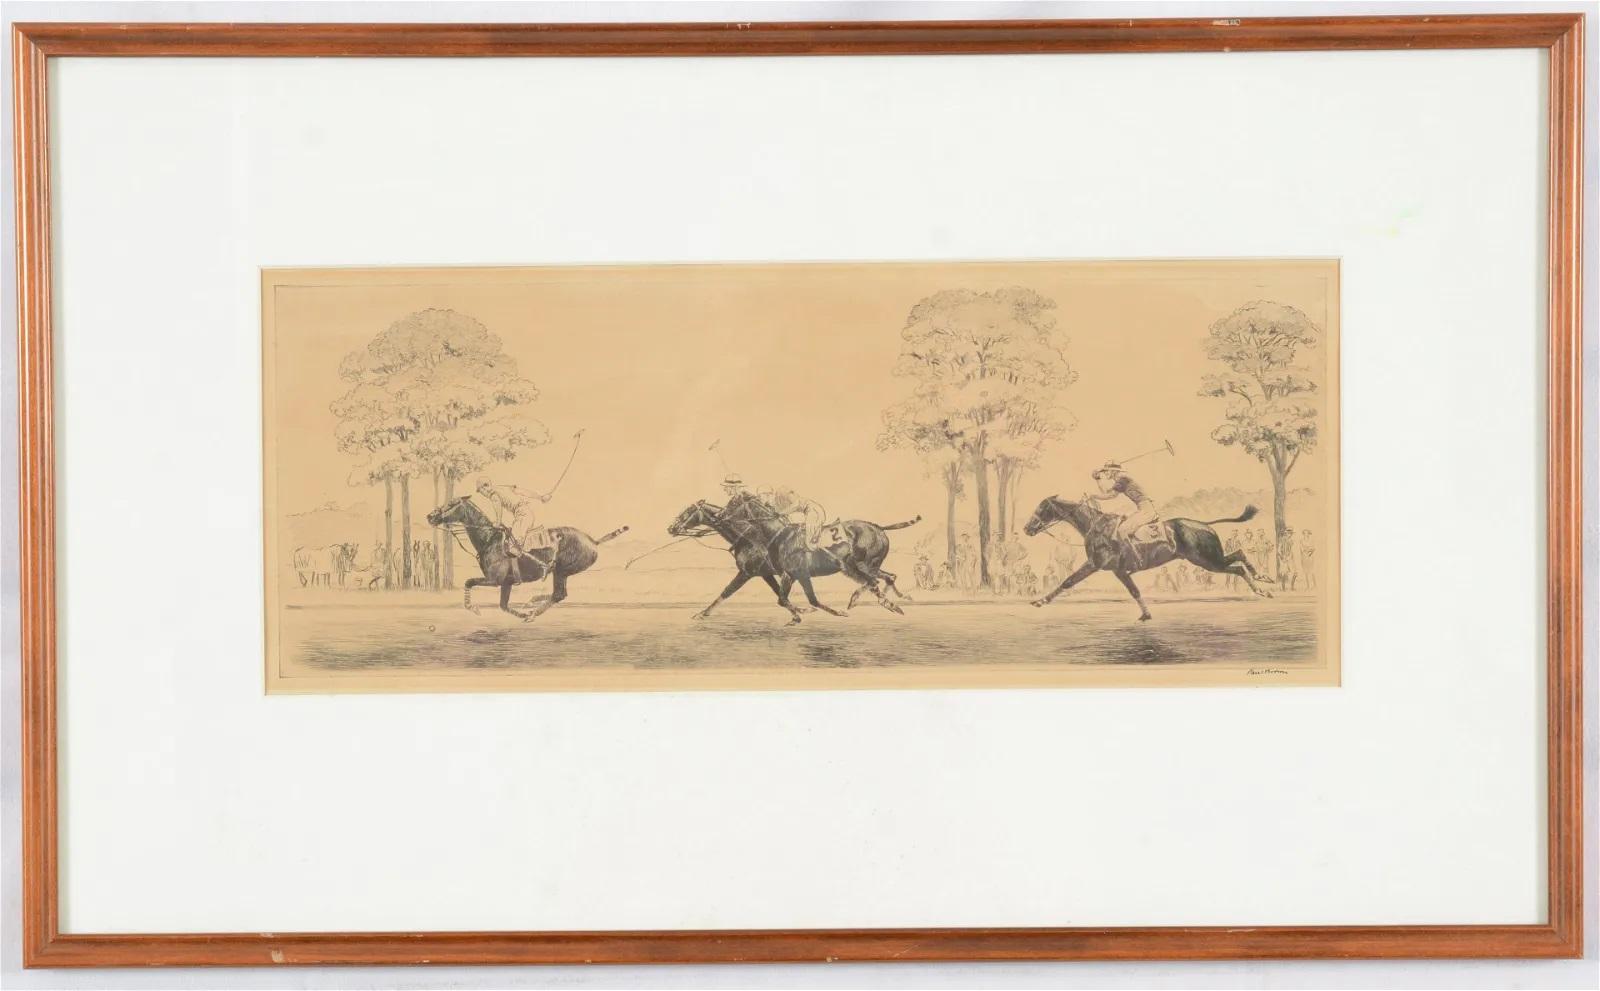 Paul Desmond Brown Abstract Drawing - "Paul Brown 4 Polo Players Charging Down The Field Drypoint Etching"